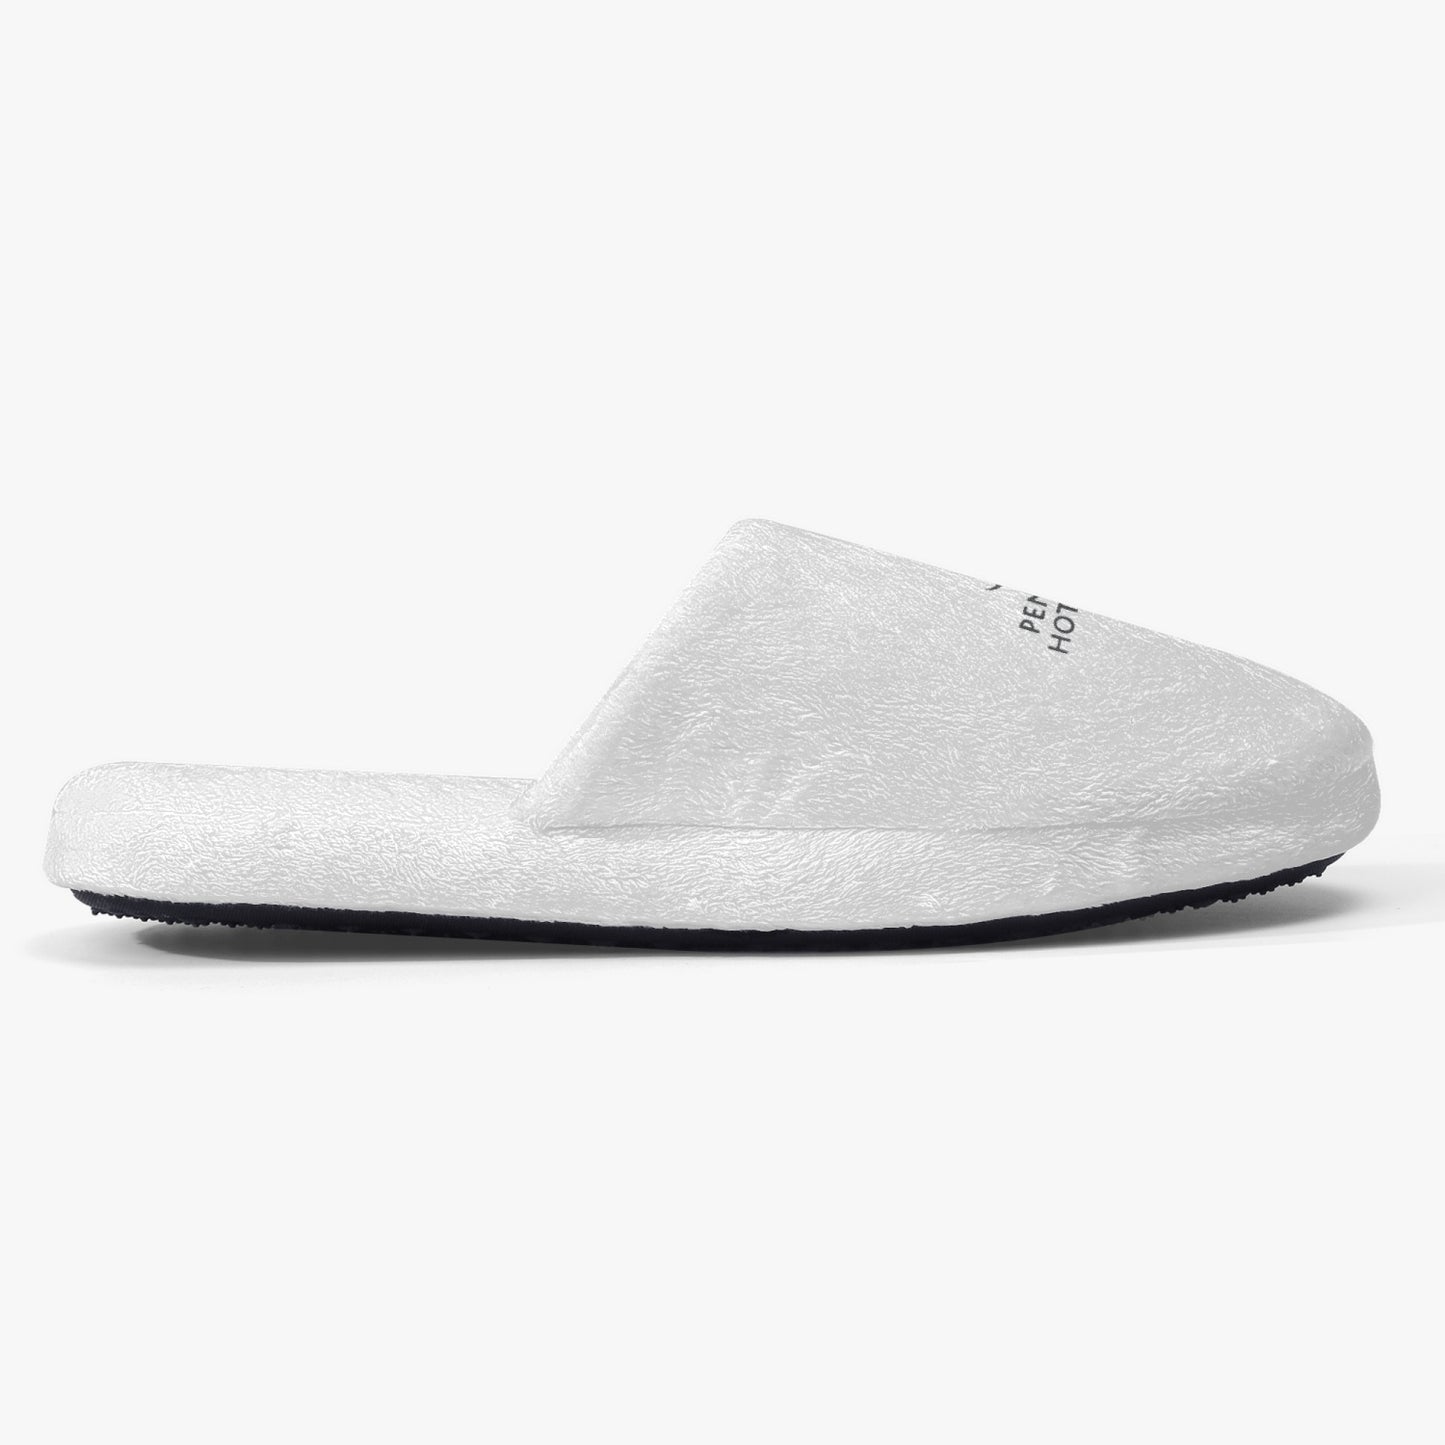 PENINSULAR HOT SPRINGS Classic Cotton Slippers